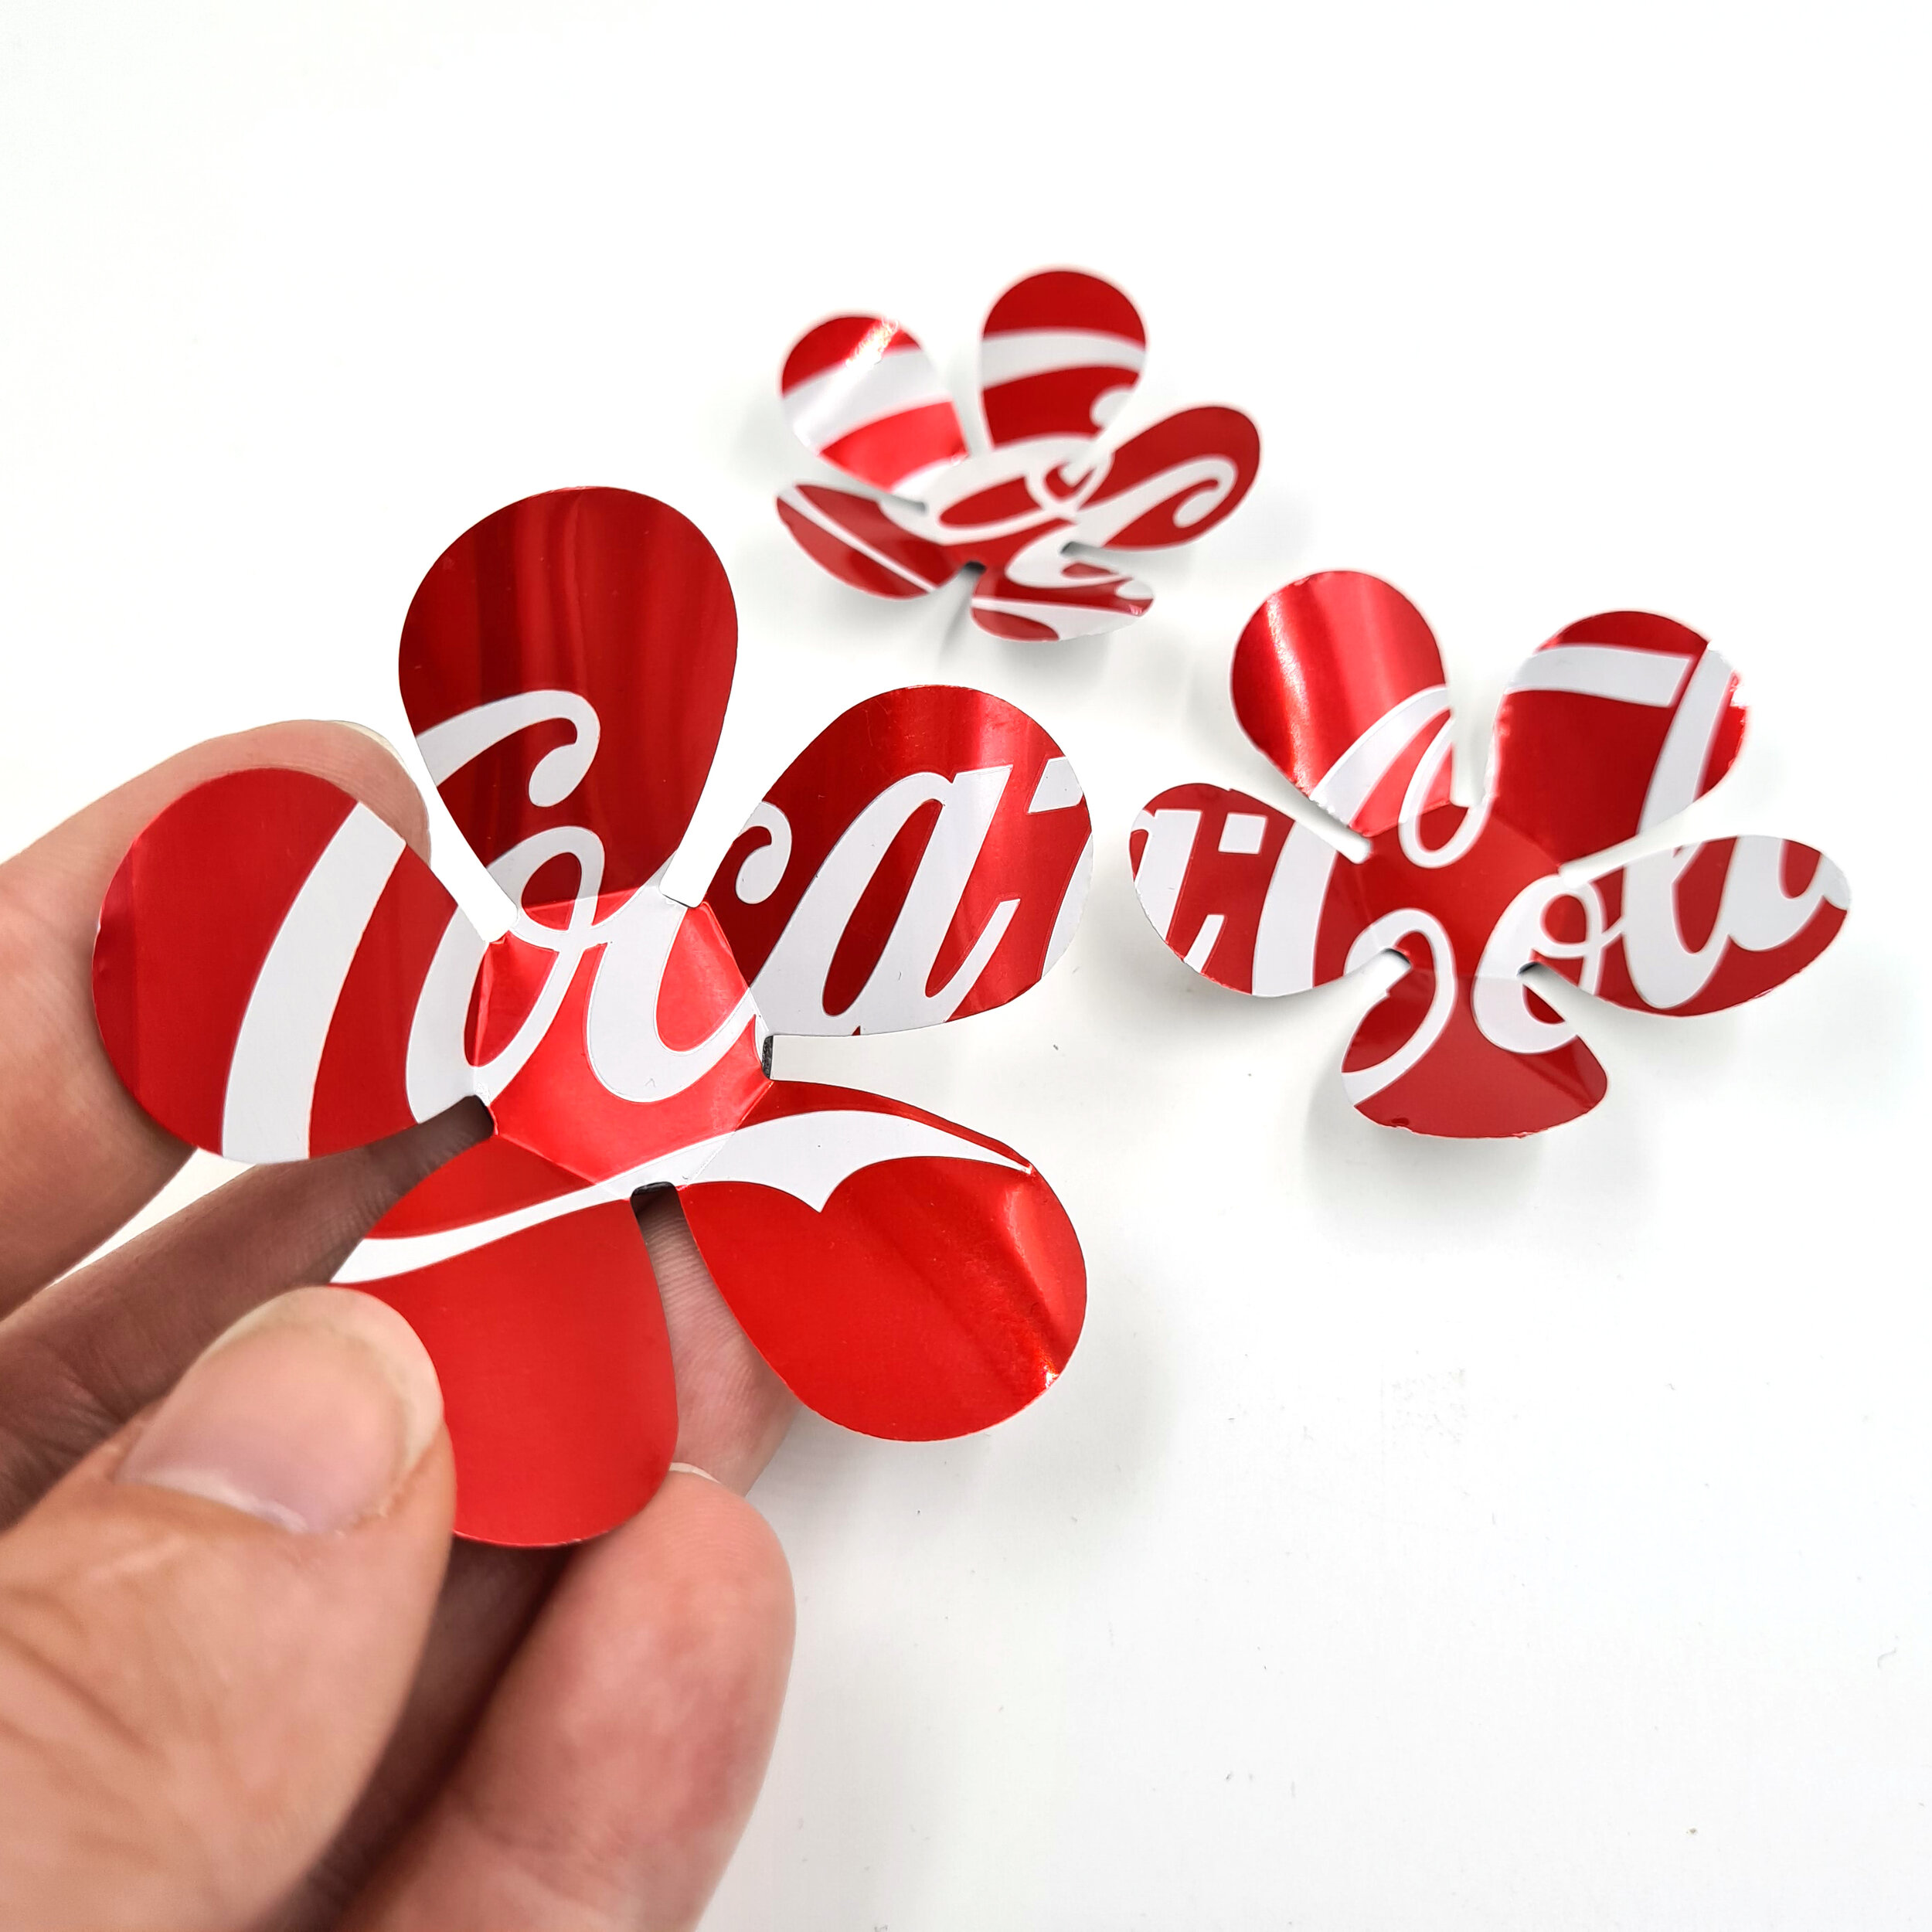 Three Coca-Cola  sustainable hand made Can Flower Magnets holding